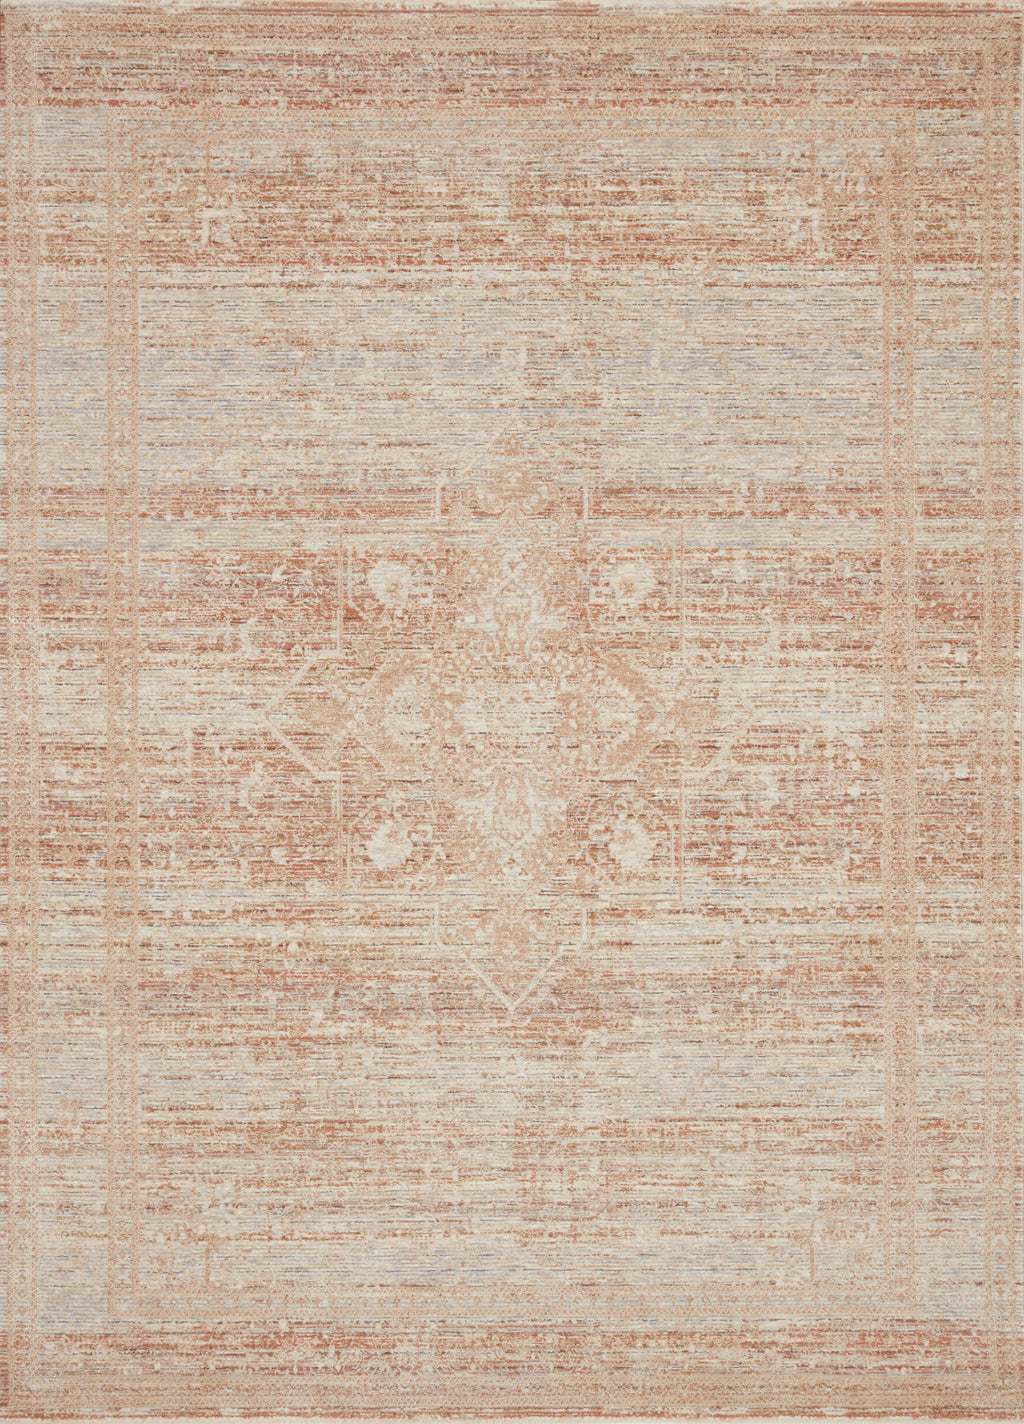 FAYE Collection Rug  in  Terracotta / Sky Orange Accent Power-Loomed Jute/Wool